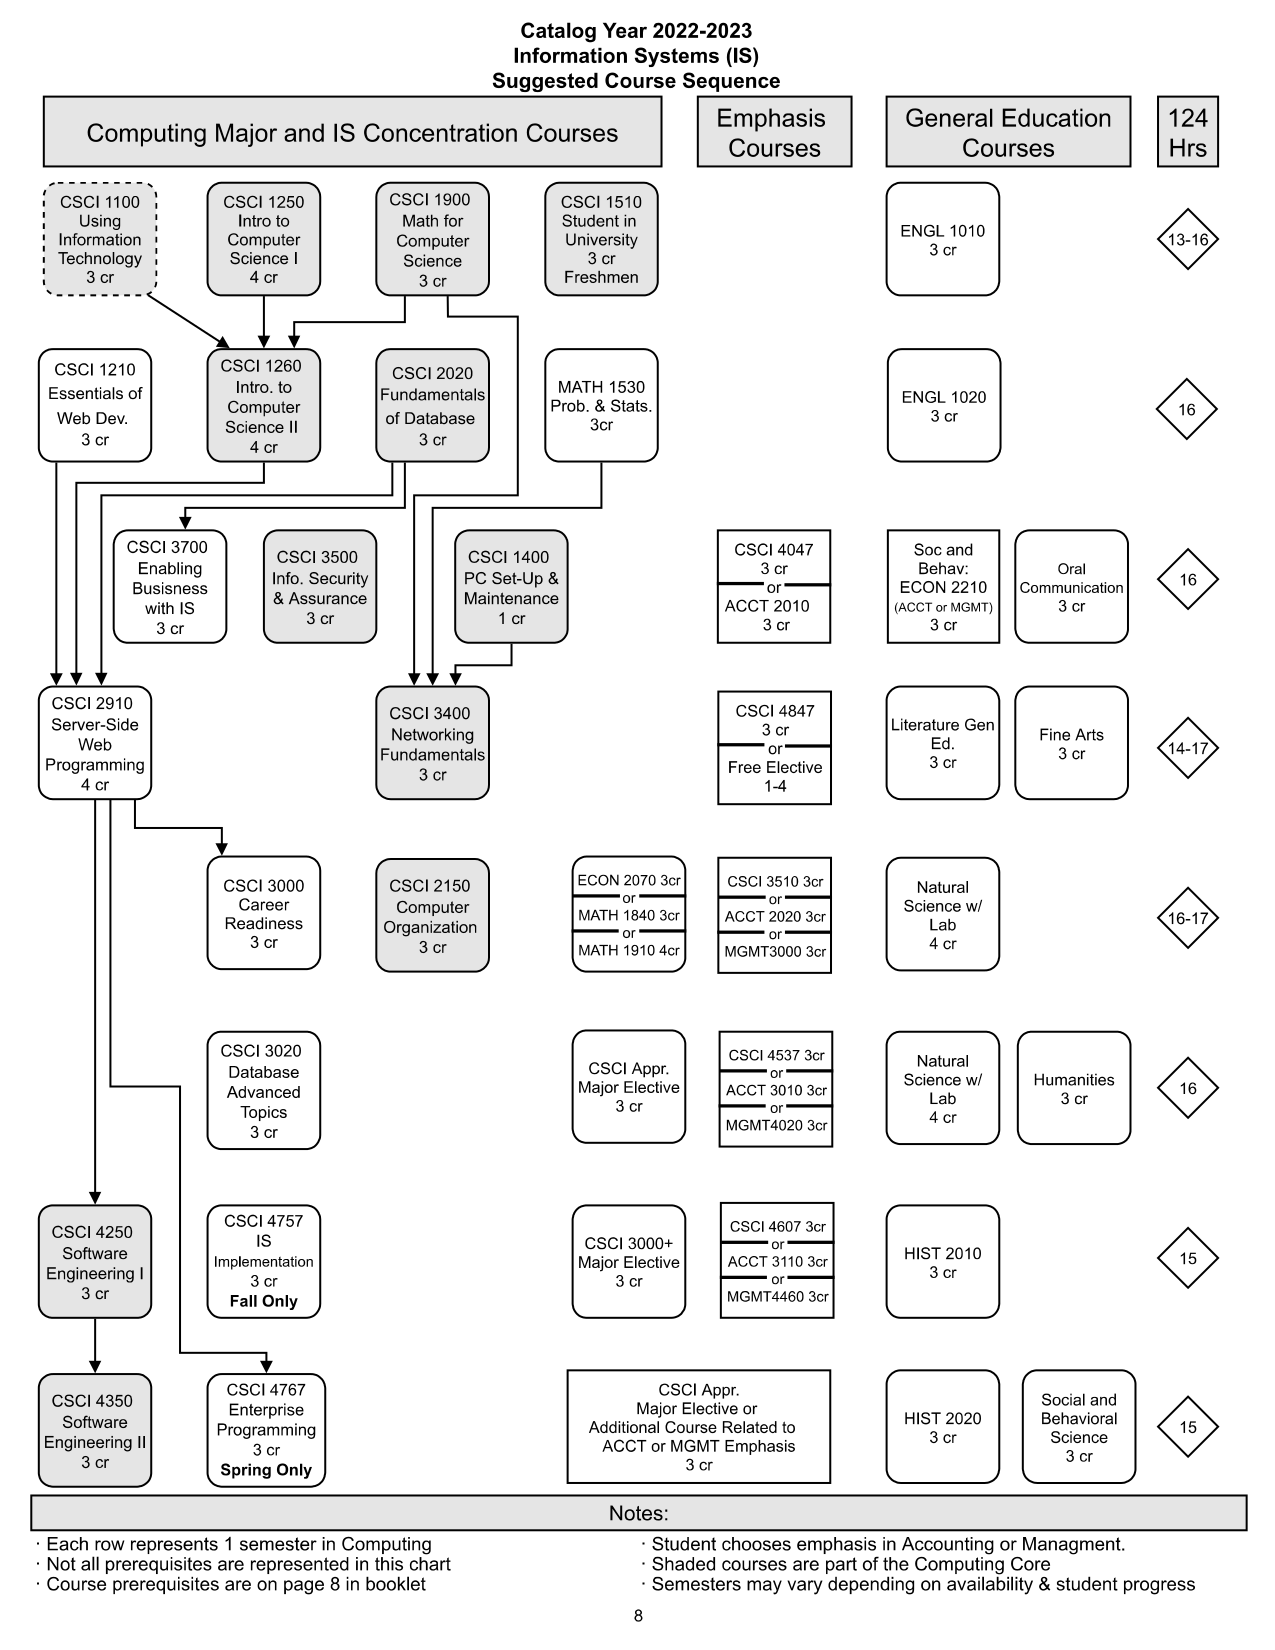 A diagram showing a suggested course path for students in the Information Systems concentration.